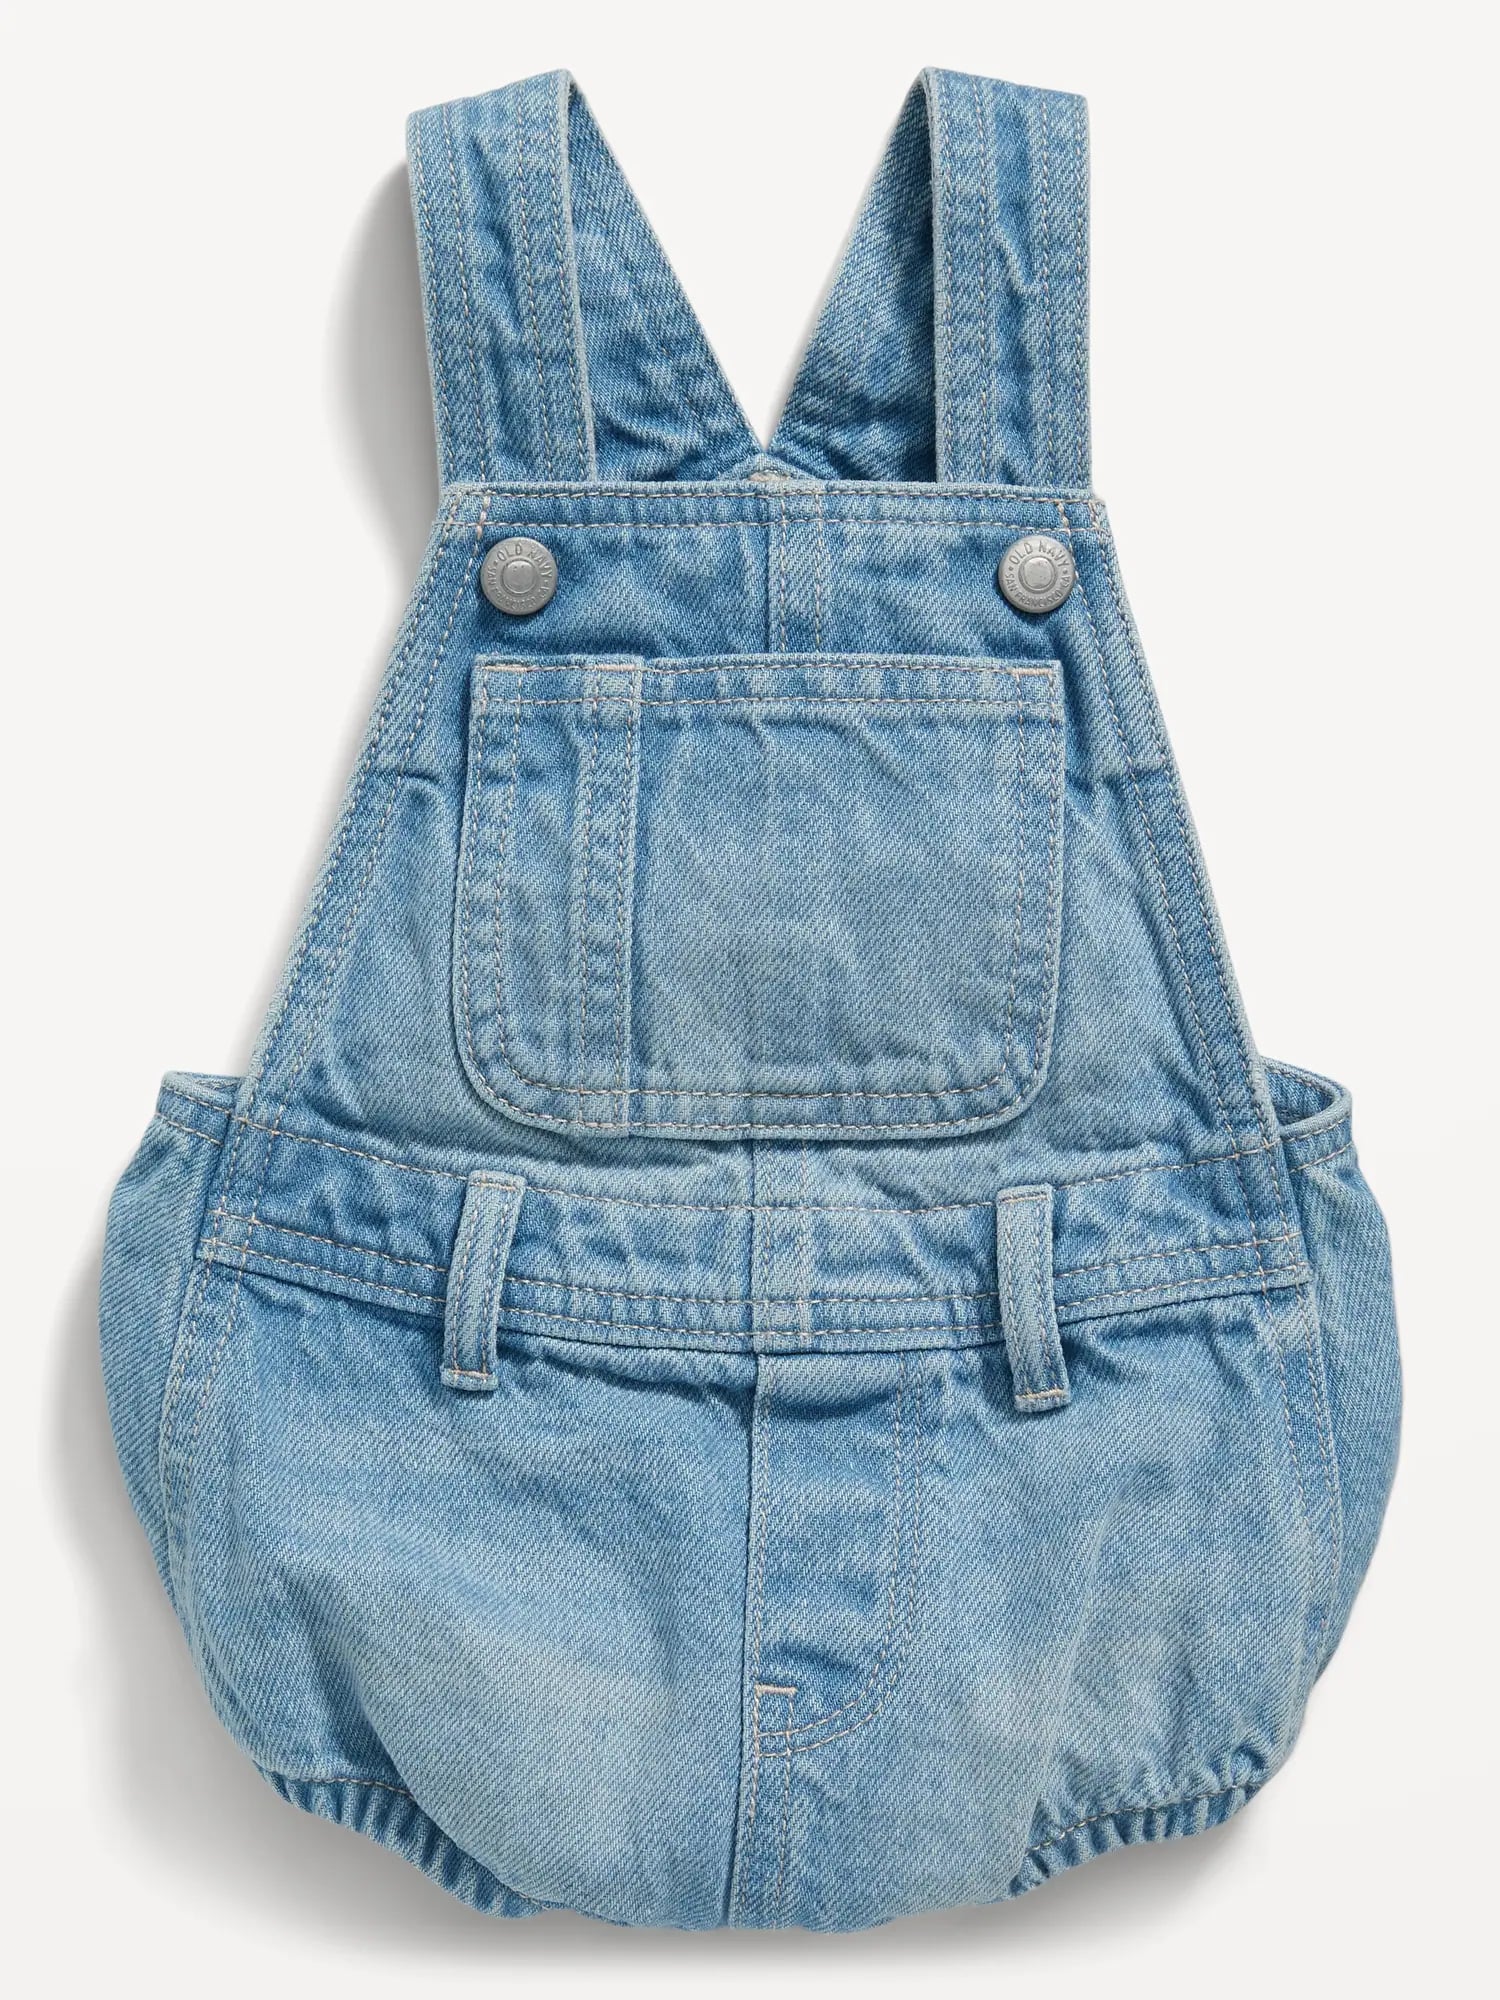 Baby Girl Clothes: New Arrivals, Old Navy